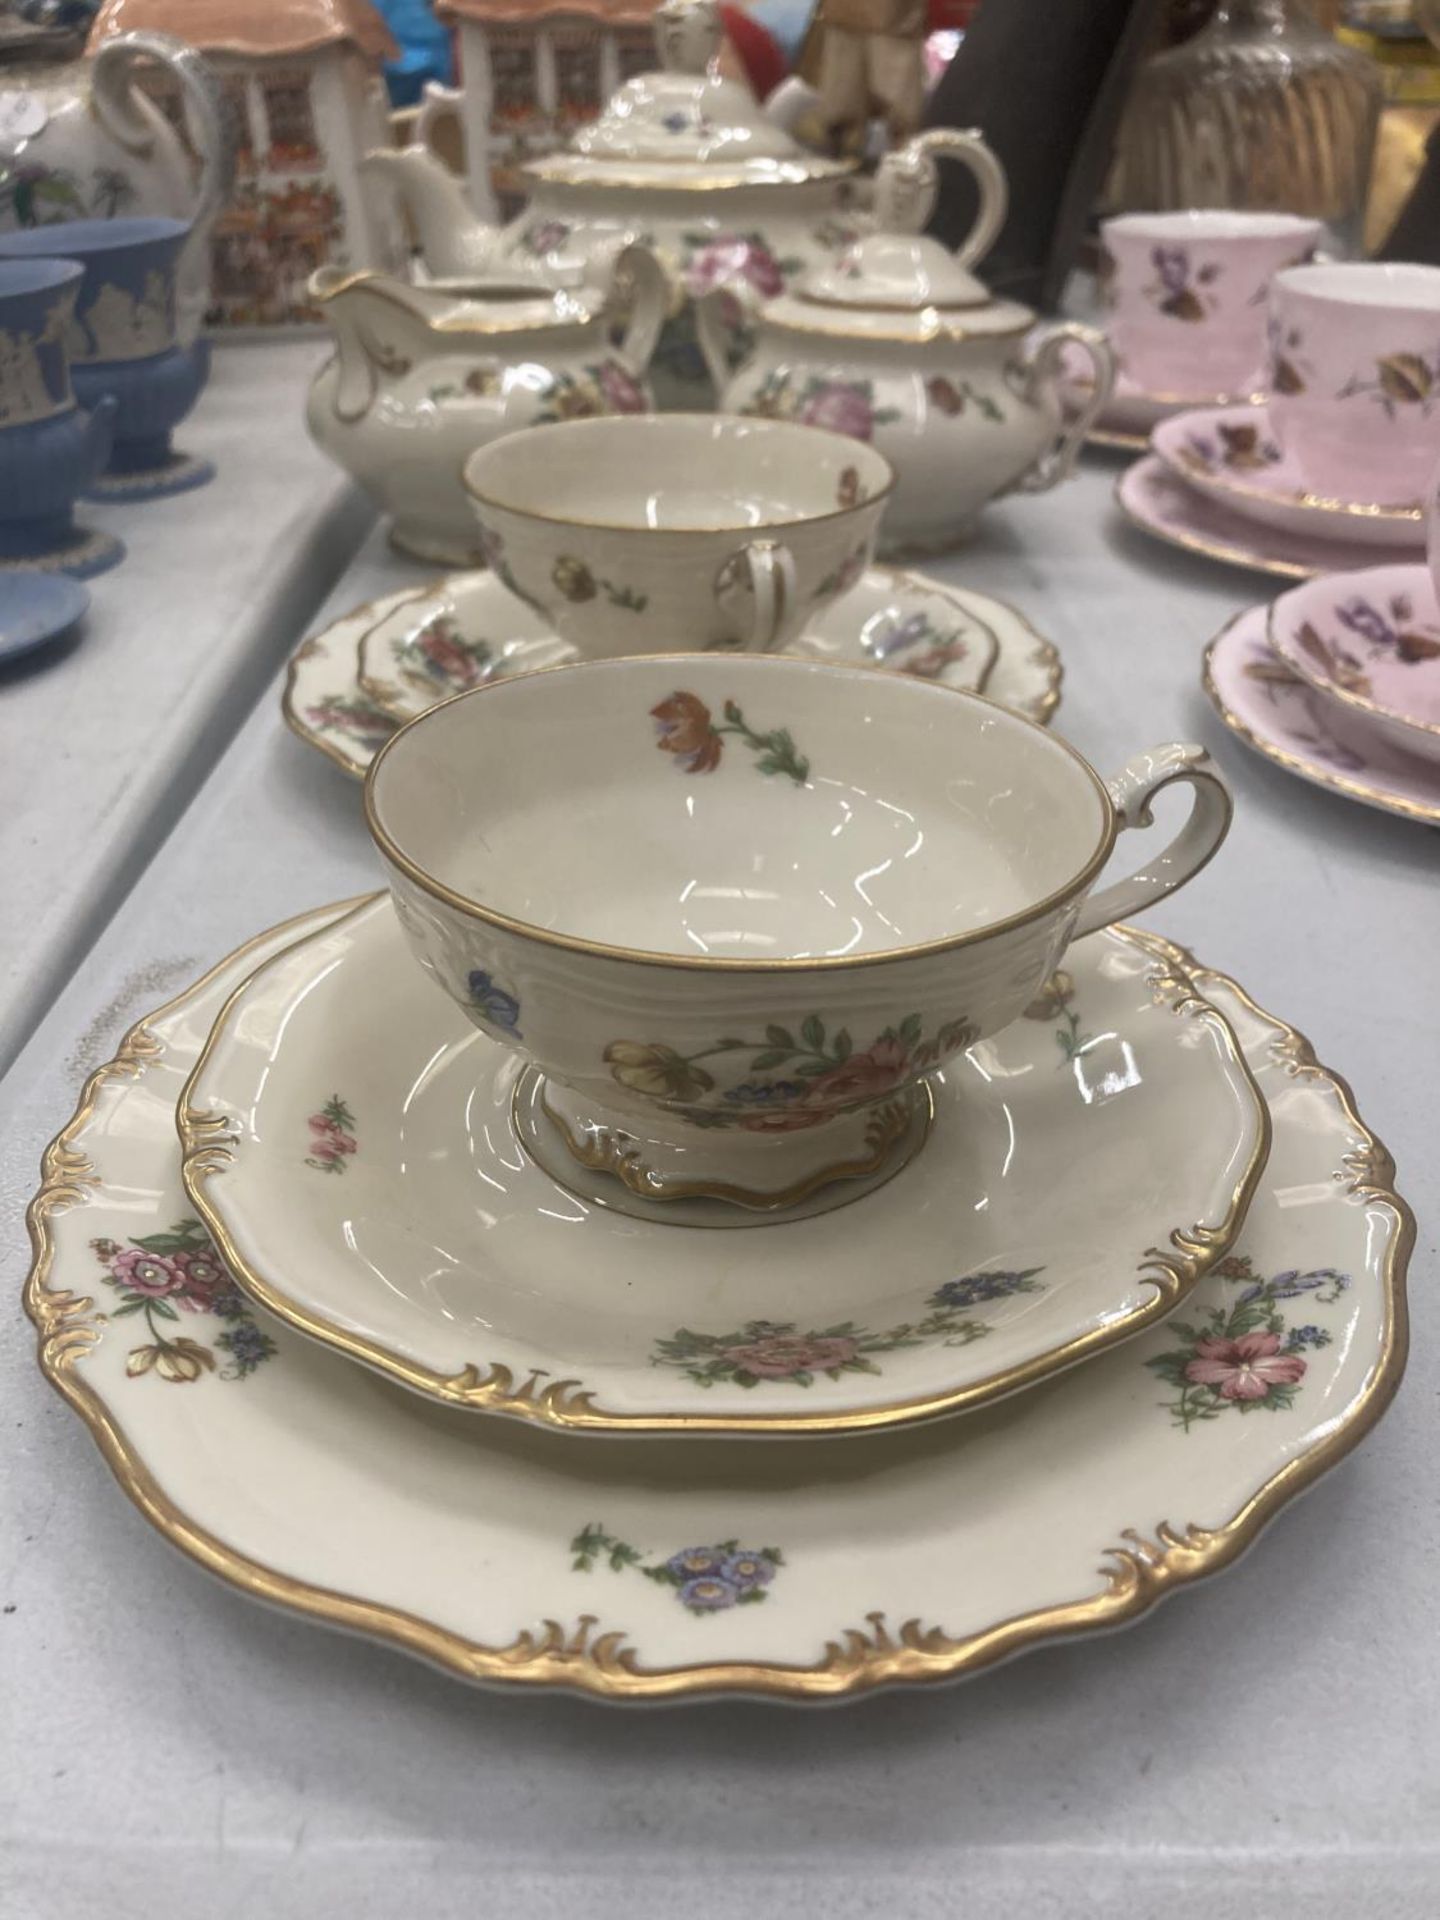 A PIRKEN HAMMER TEASET WITH A DELICATE FLORAL DESIGN WITH GILT RIMS TO INCLUDE A TEAPOT, CREAM - Image 3 of 5